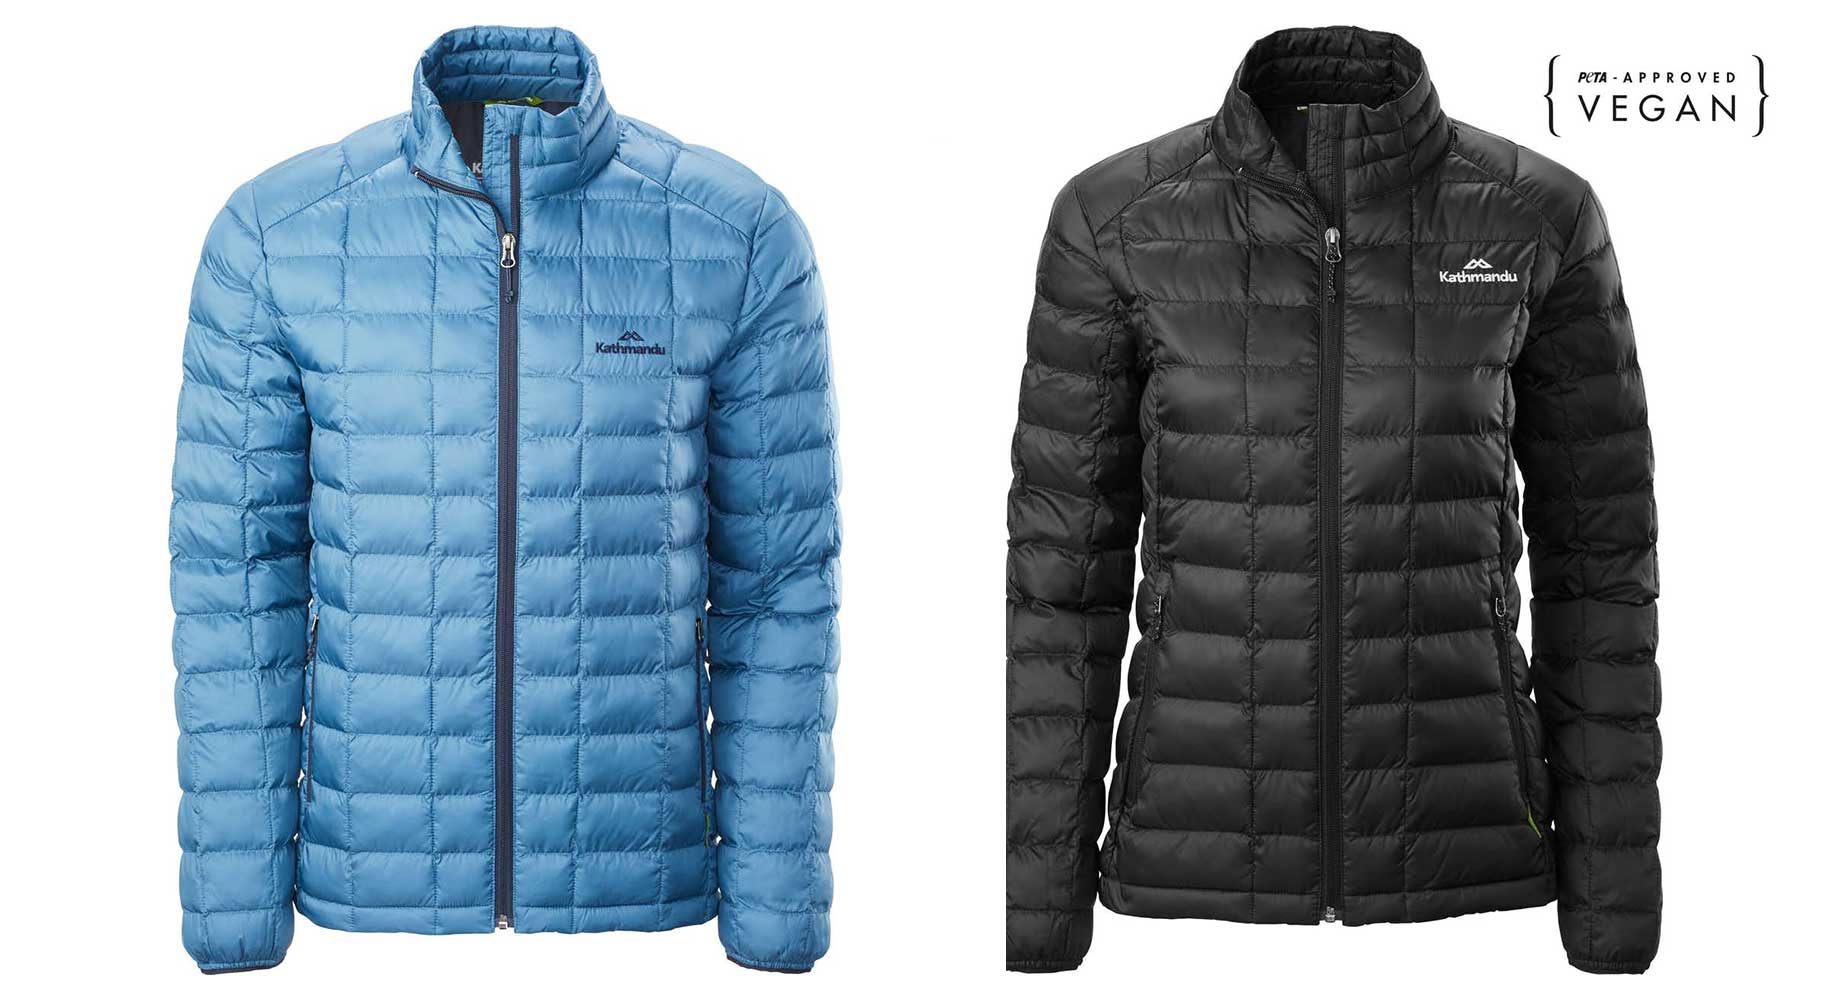 Kathmandu’s Best-Selling Puffer Jacket Is Now Feather-Free and PETA Approved!